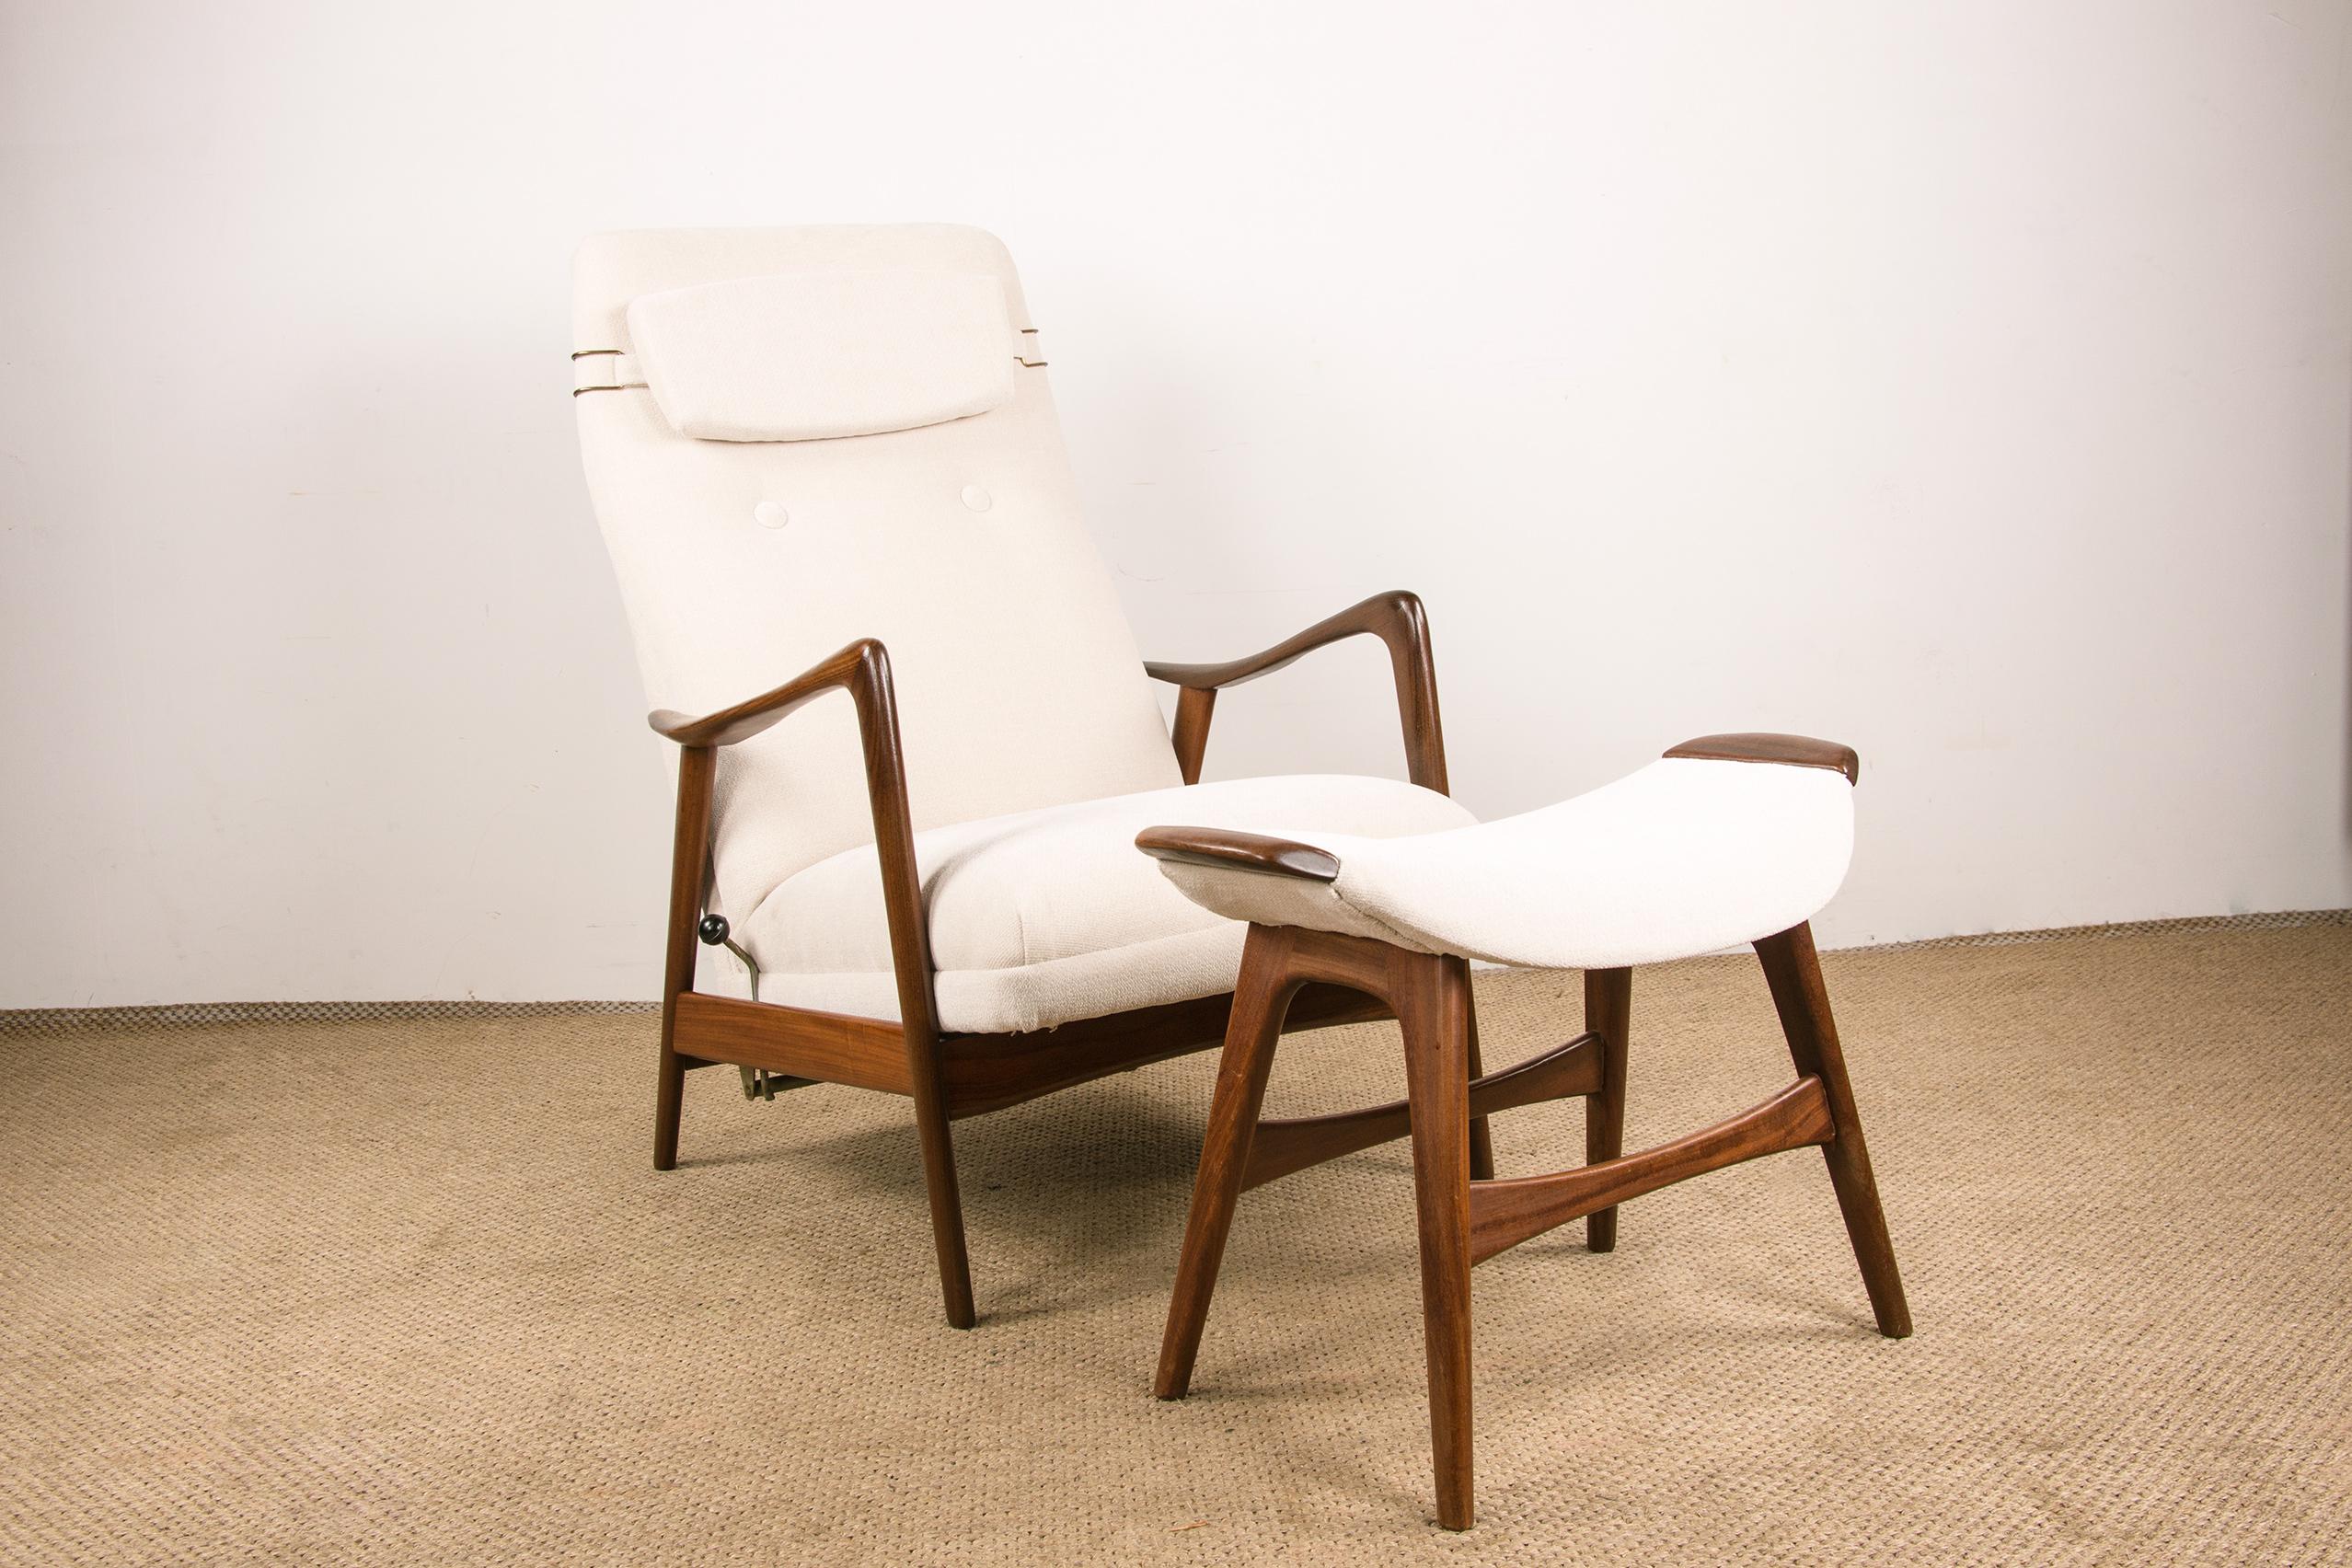 Large Scandinavian Teak Armchair with Ottomans by Folke Ohlsson for Westnofa 196 For Sale 2